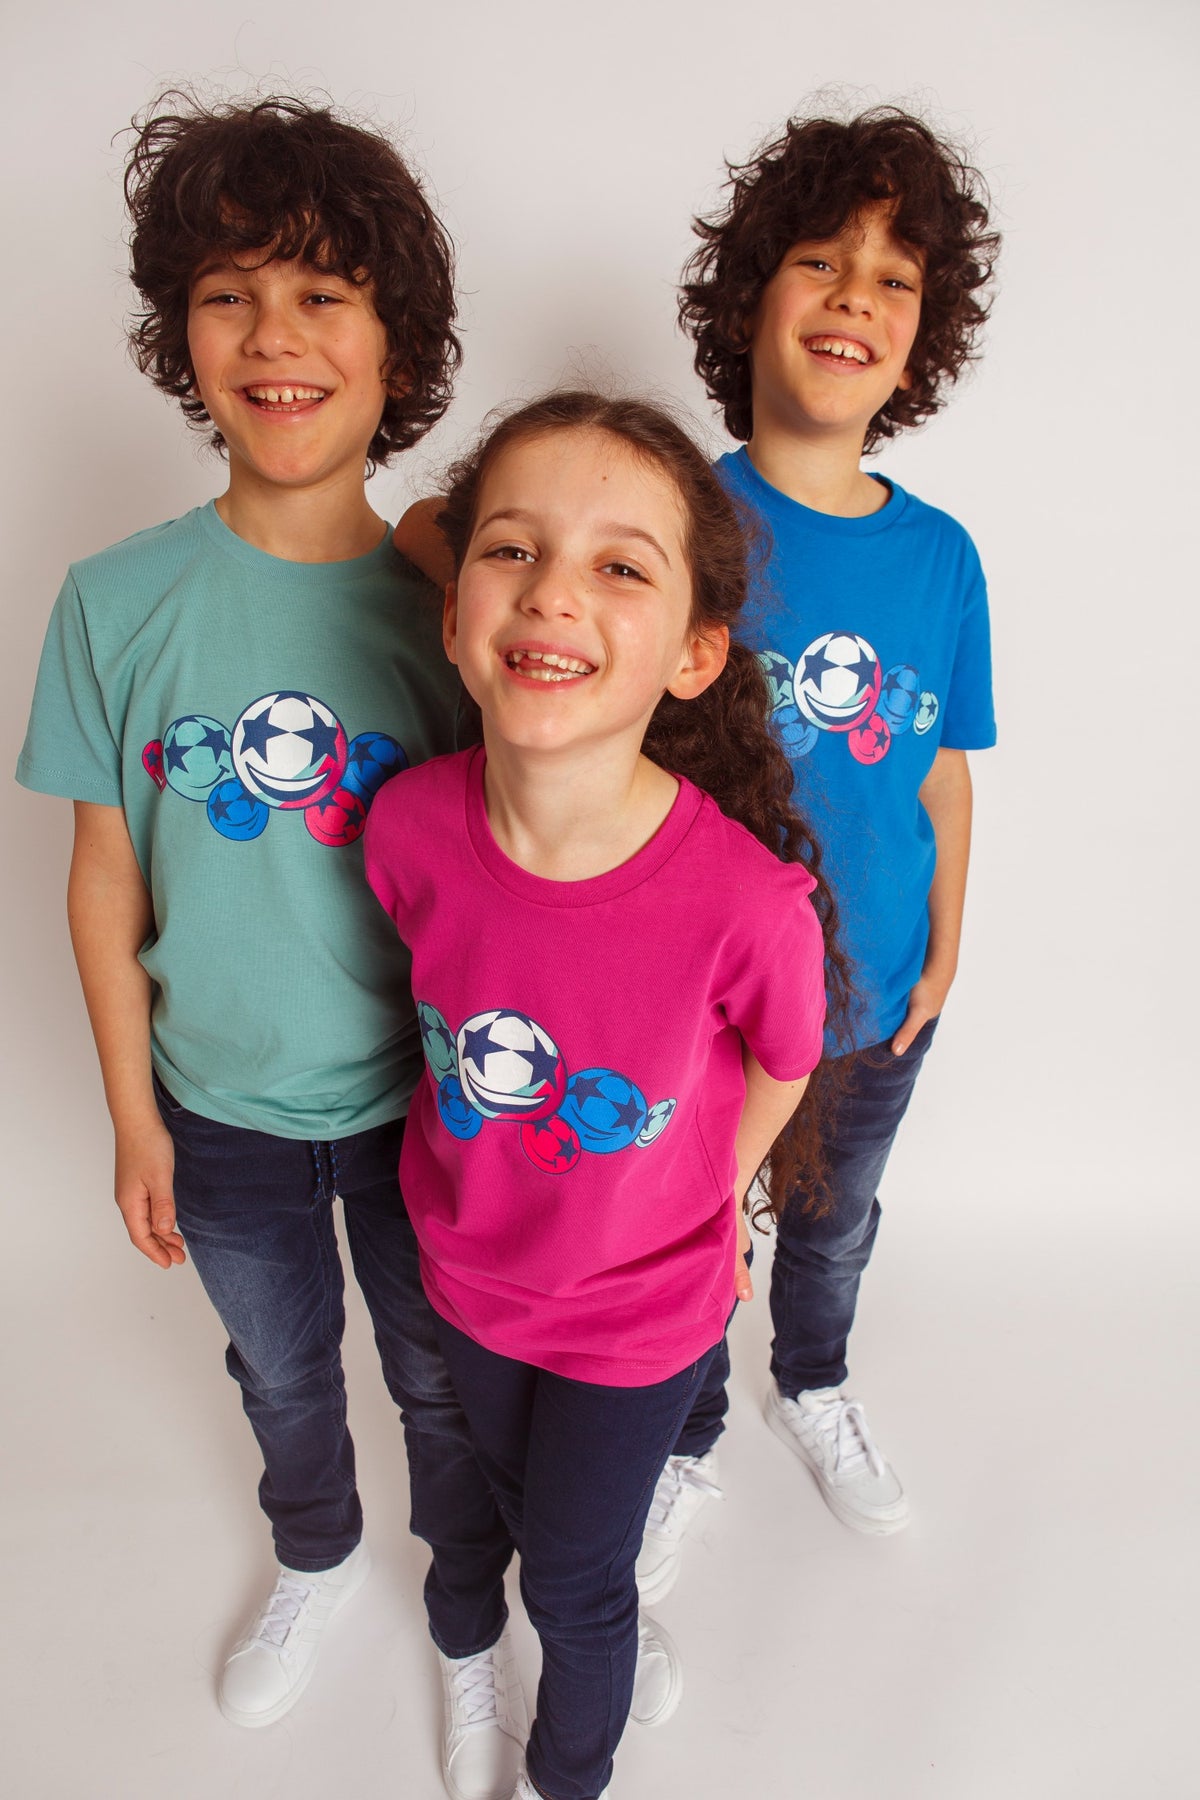 UCL Smiling Starball Kinder-T-Shirt – Orchideenblume